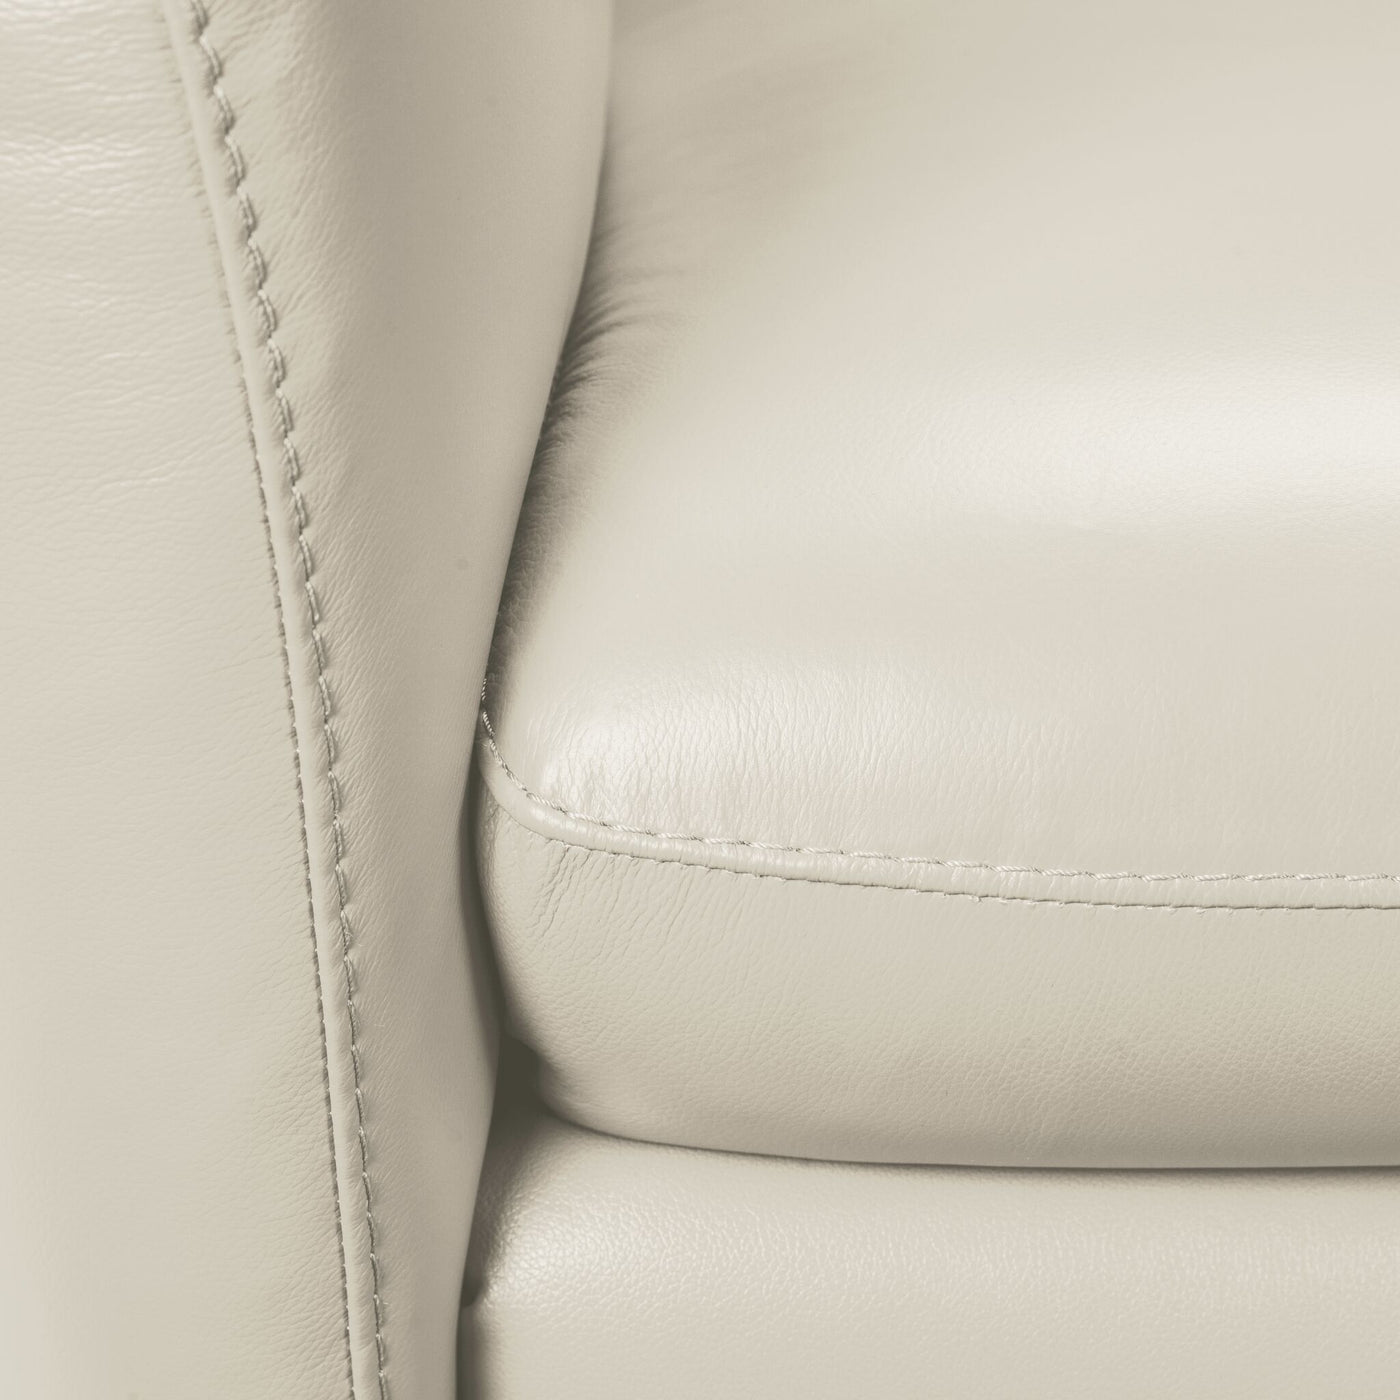 Carlino Leather Chair - Silver